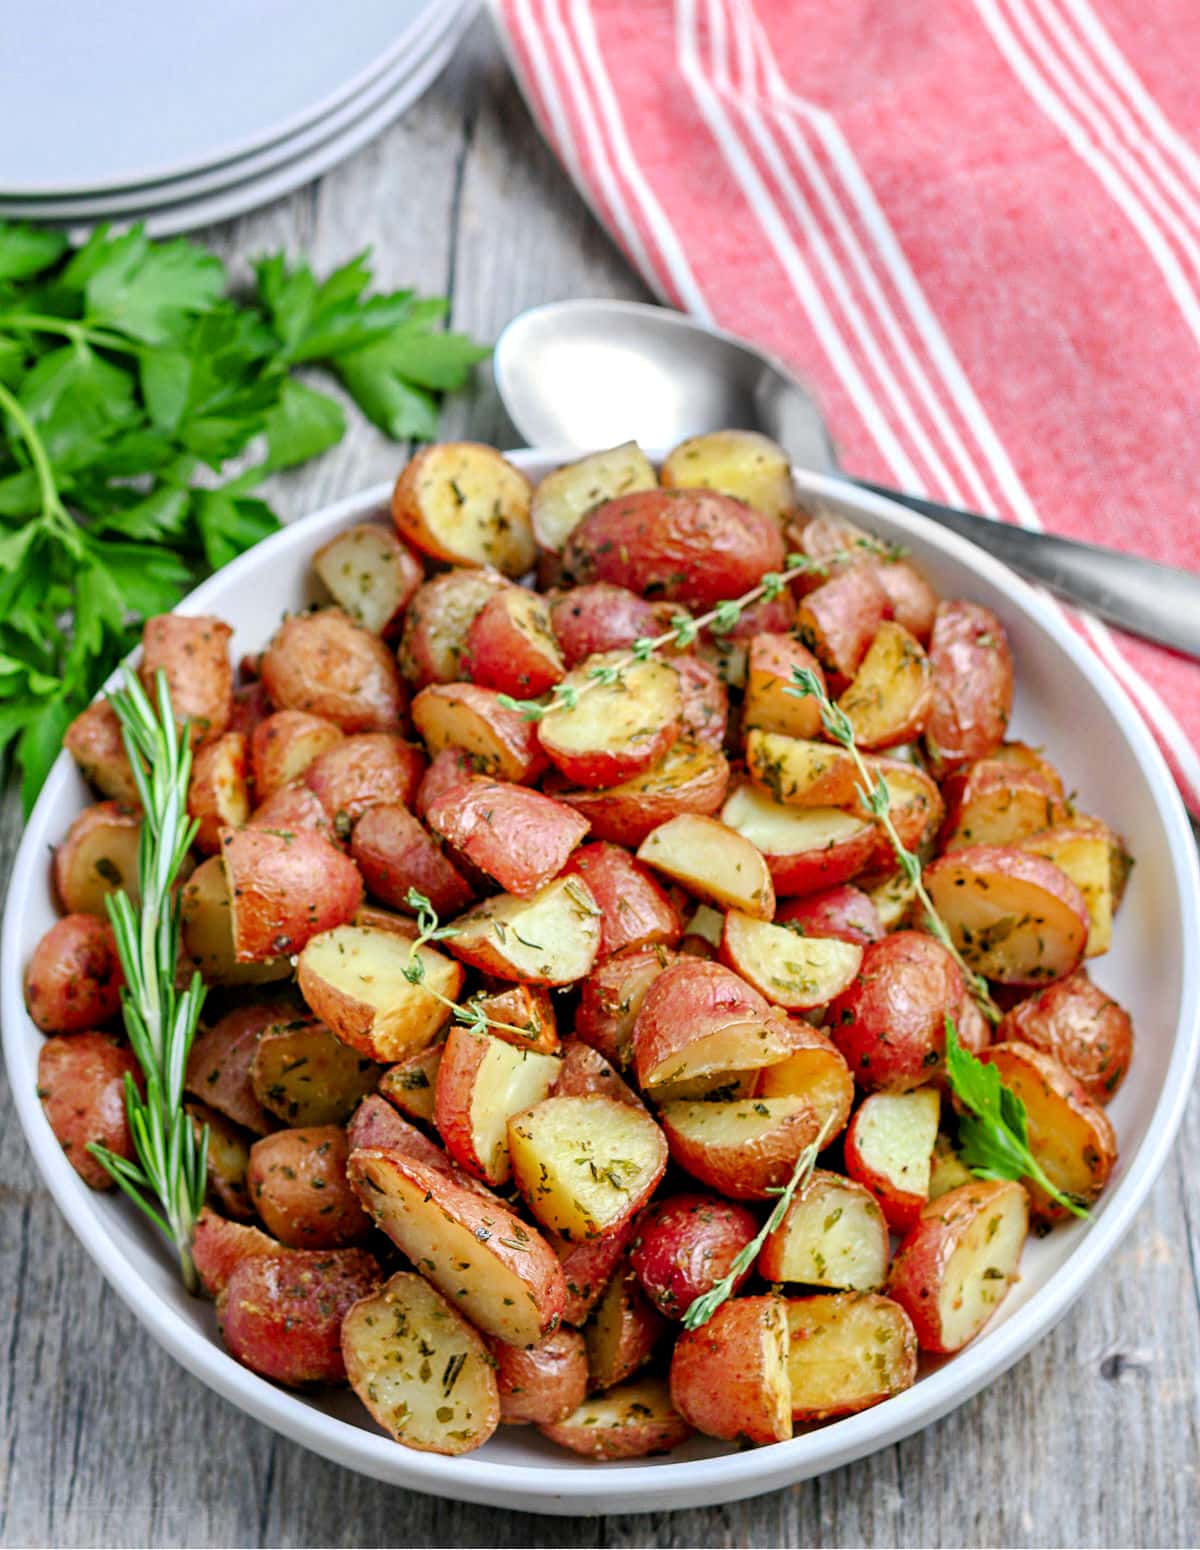 roasted red potatoes on white plate sitting on red and white striped towel